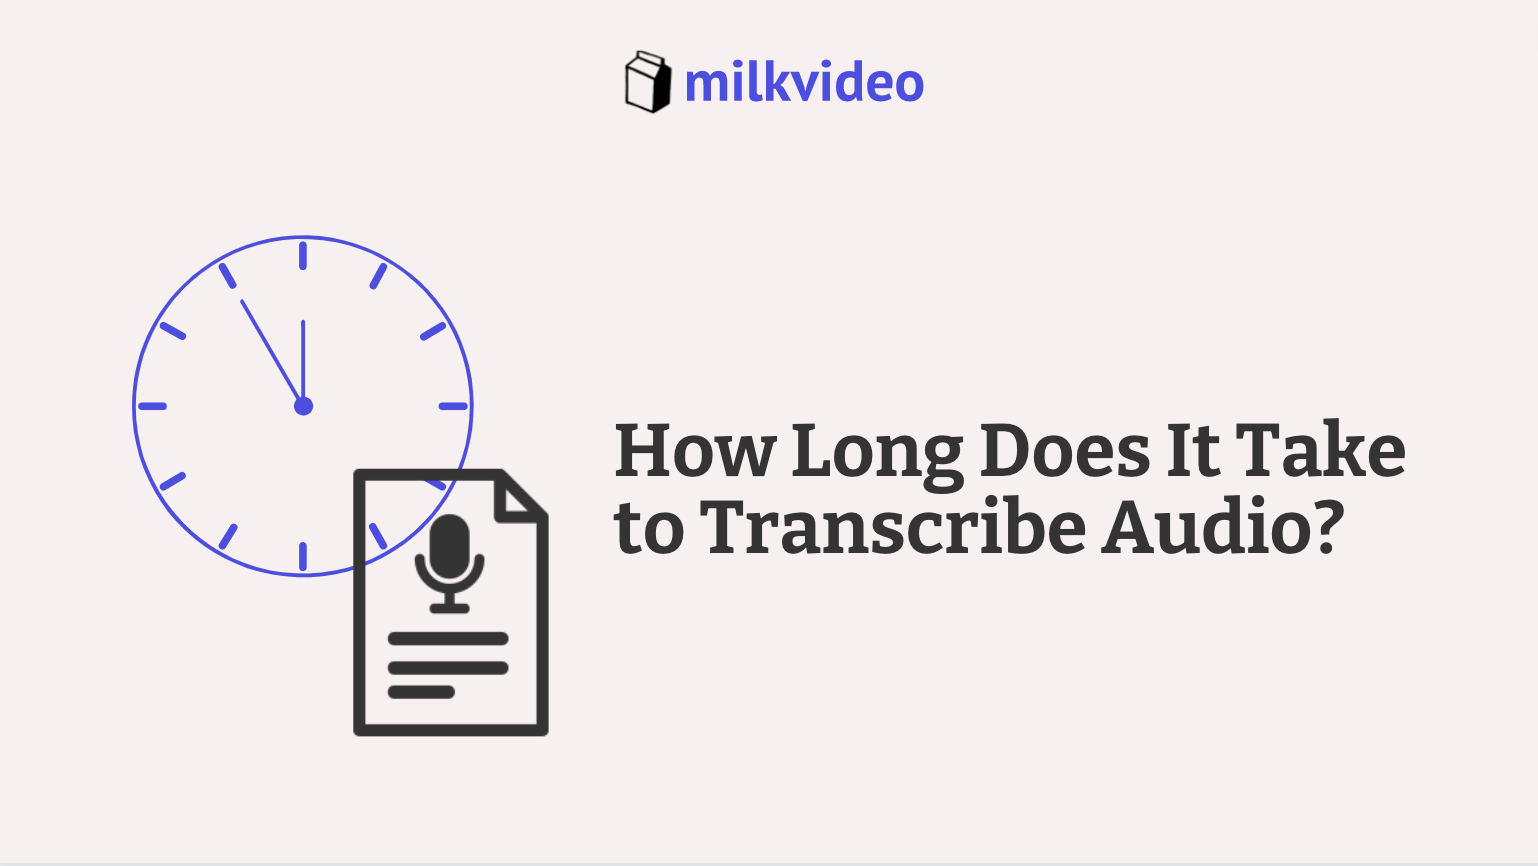 How Long Does It Take to Transcribe Audio?